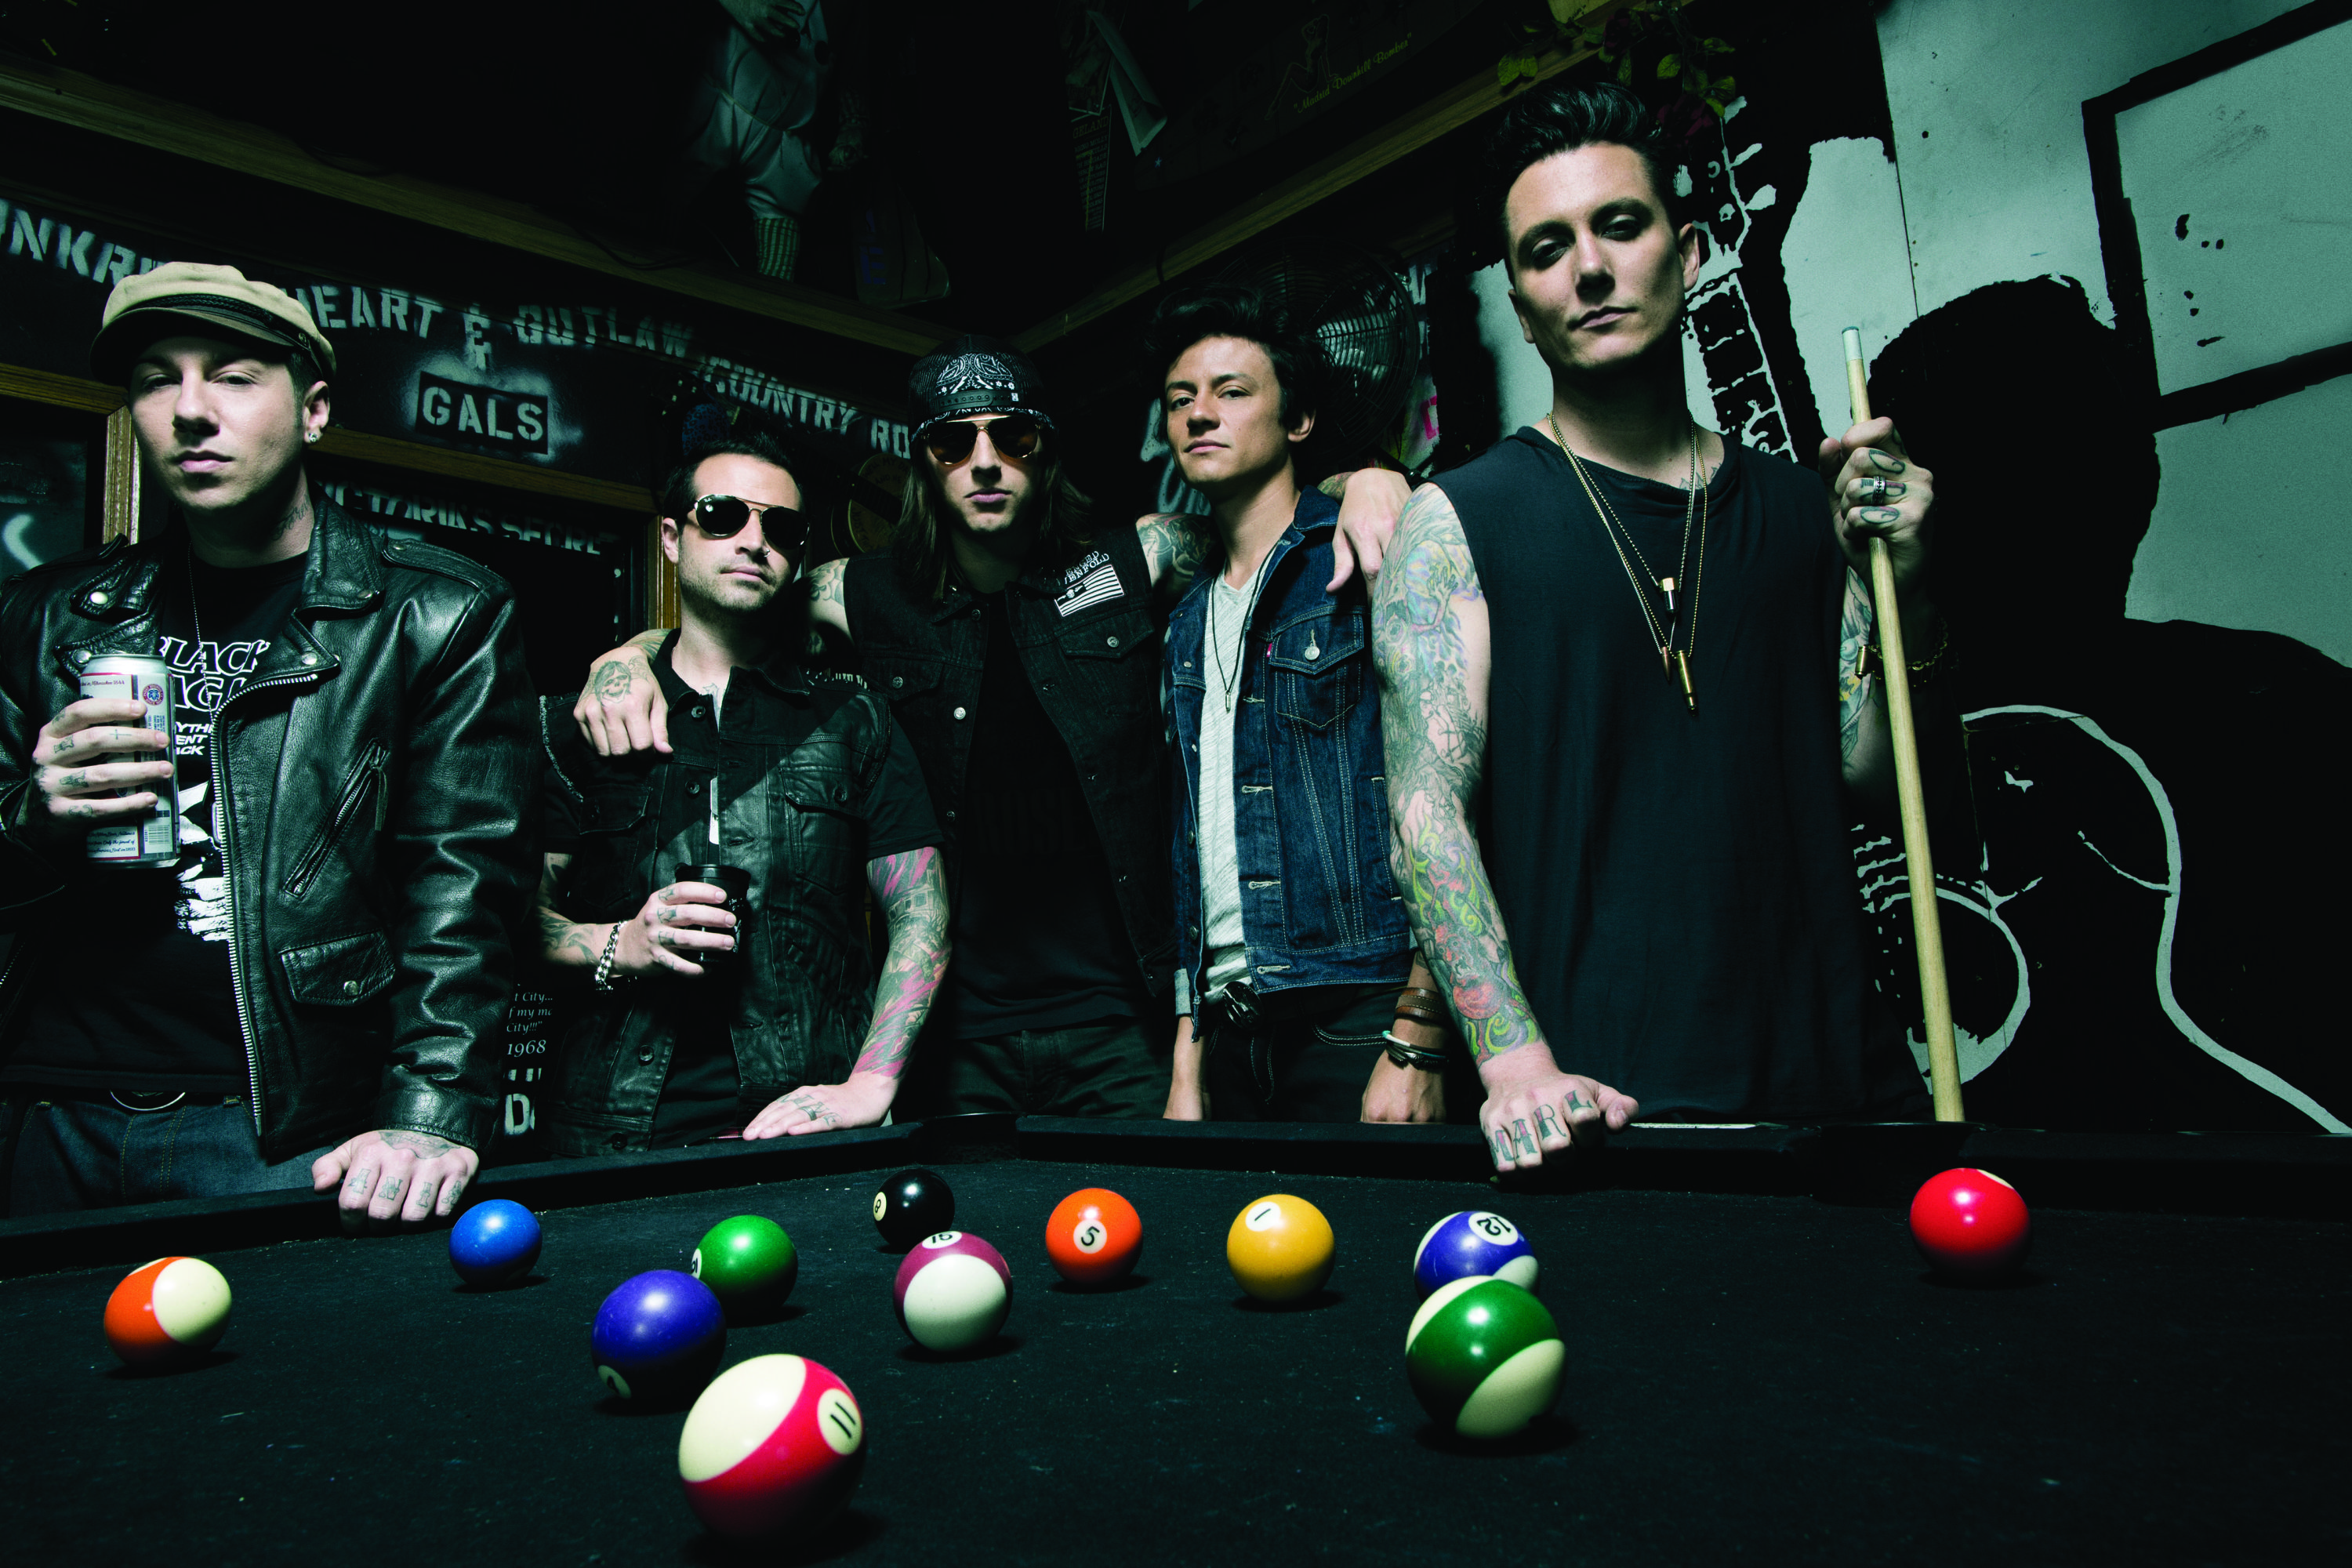 Avenged Sevenfold Returns to Rio on Saturday, March 15th